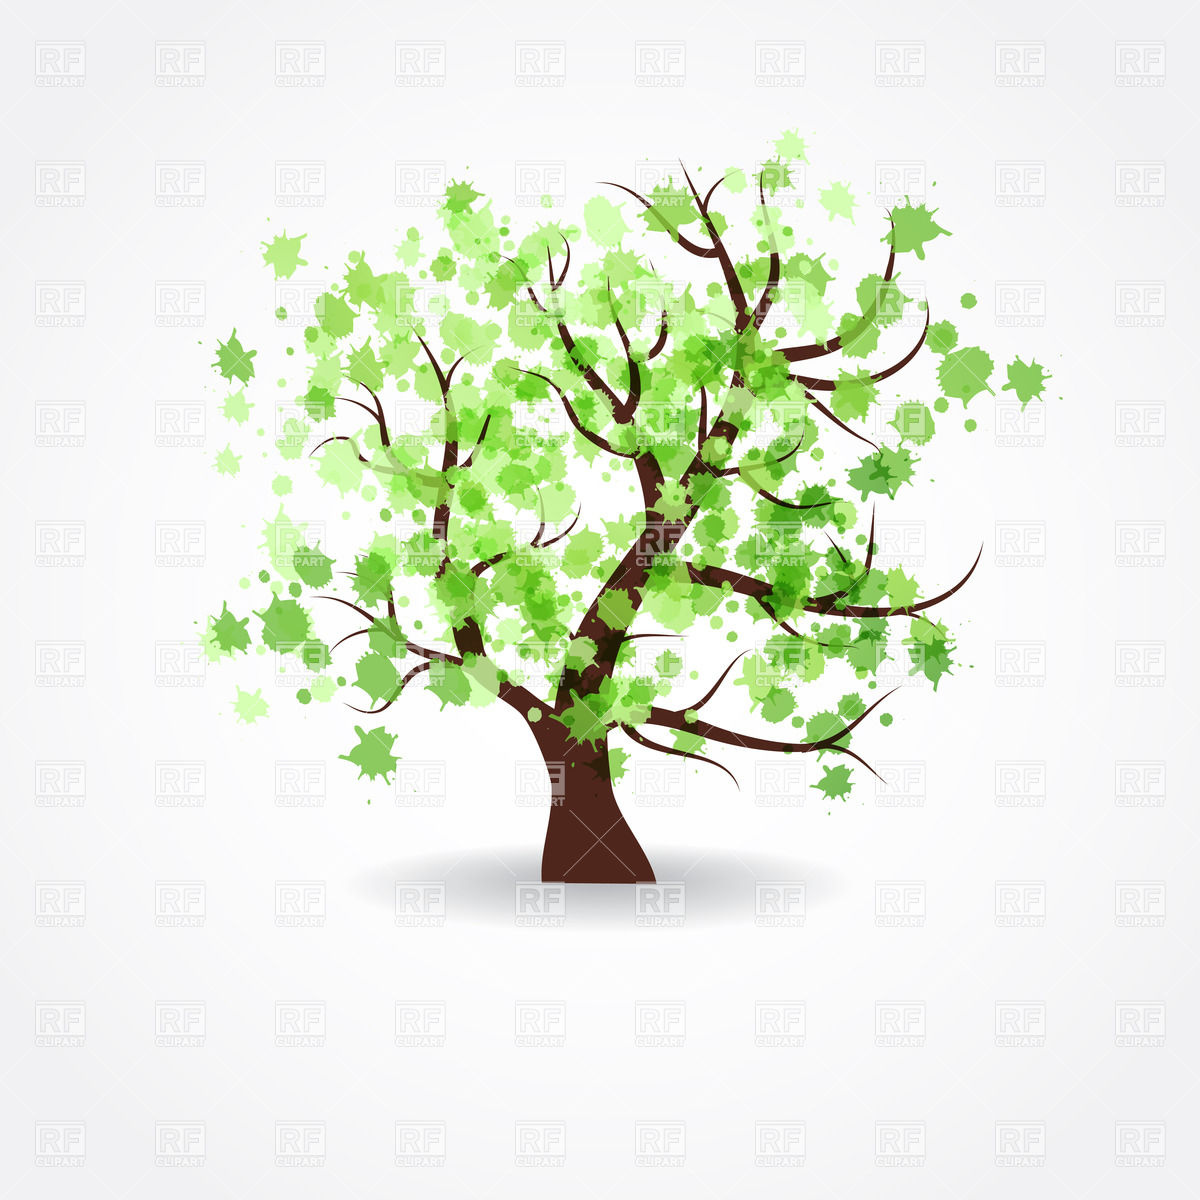 Spring Tree Clipart Crown Of A Spring Tree Made Of